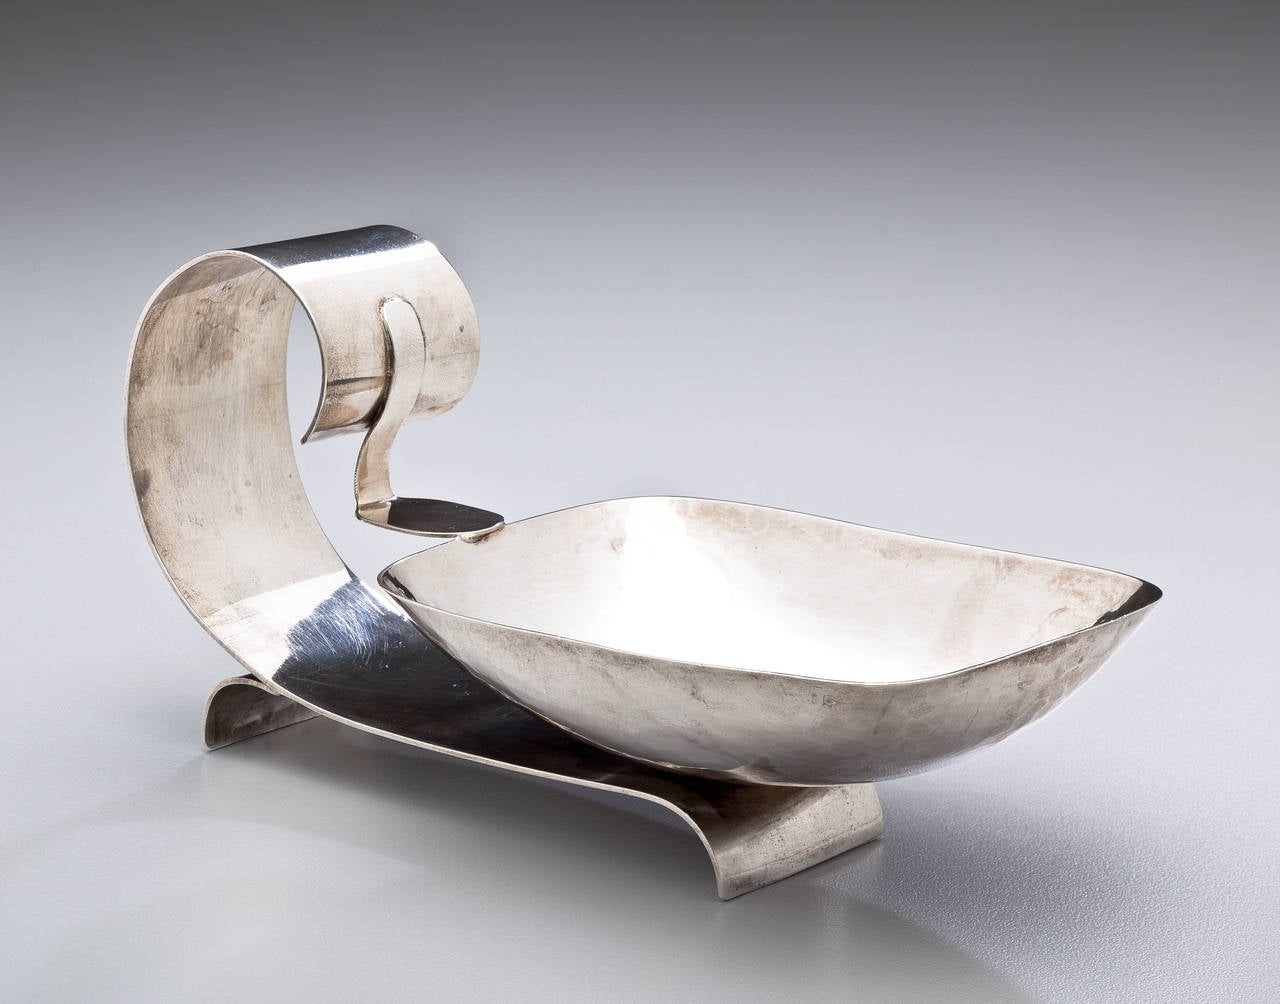 An Art Deco sterling silver serving dish for nuts or candy by California sculptor and silversmith Philip Paval. Paval's handcrafted and elegant designs were popular with the Hollywood greats of the period. Today his work is highly desirable but